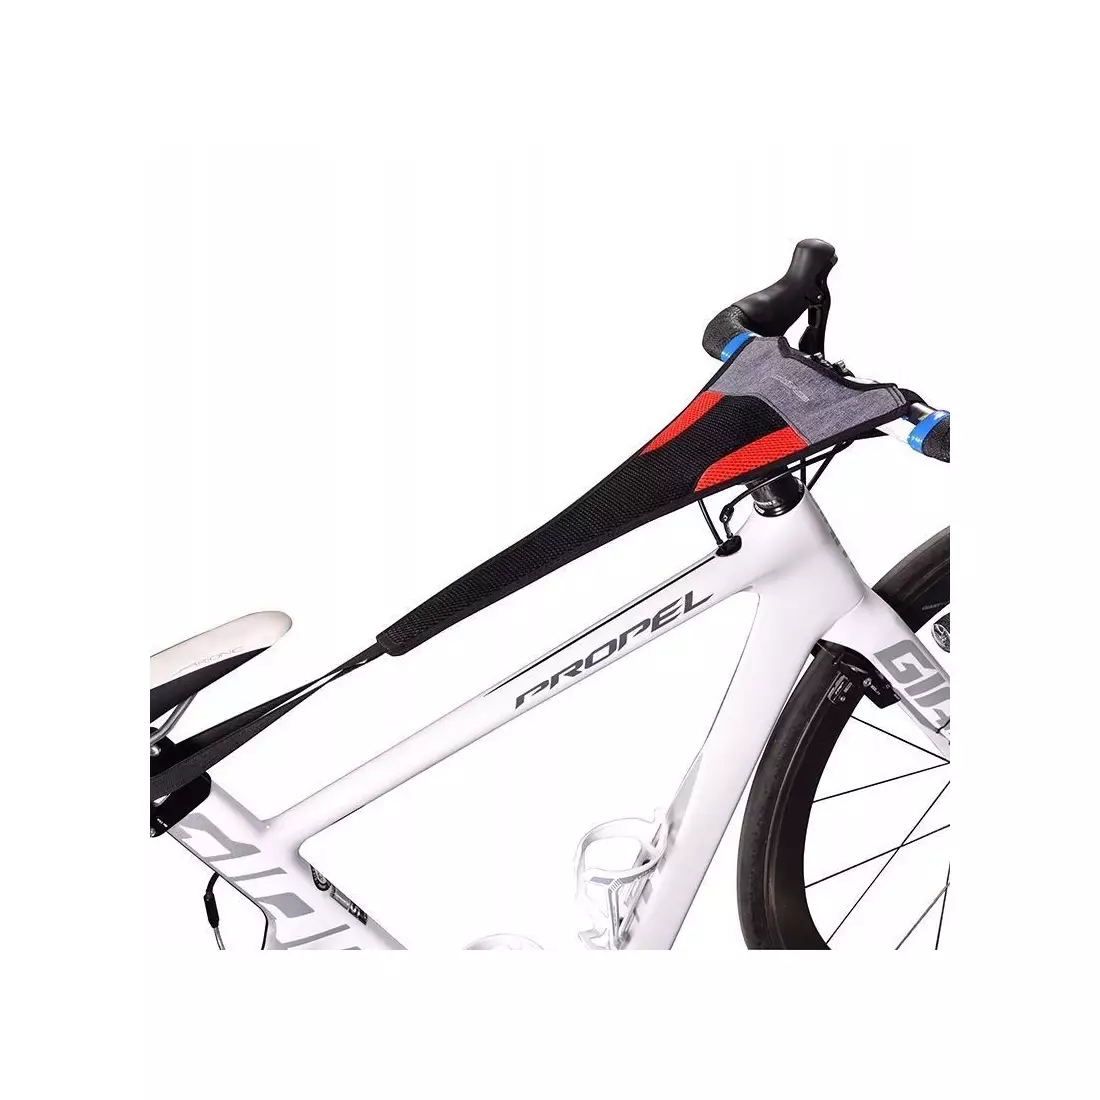 Rockbros cover for bicycle frame for D23-1